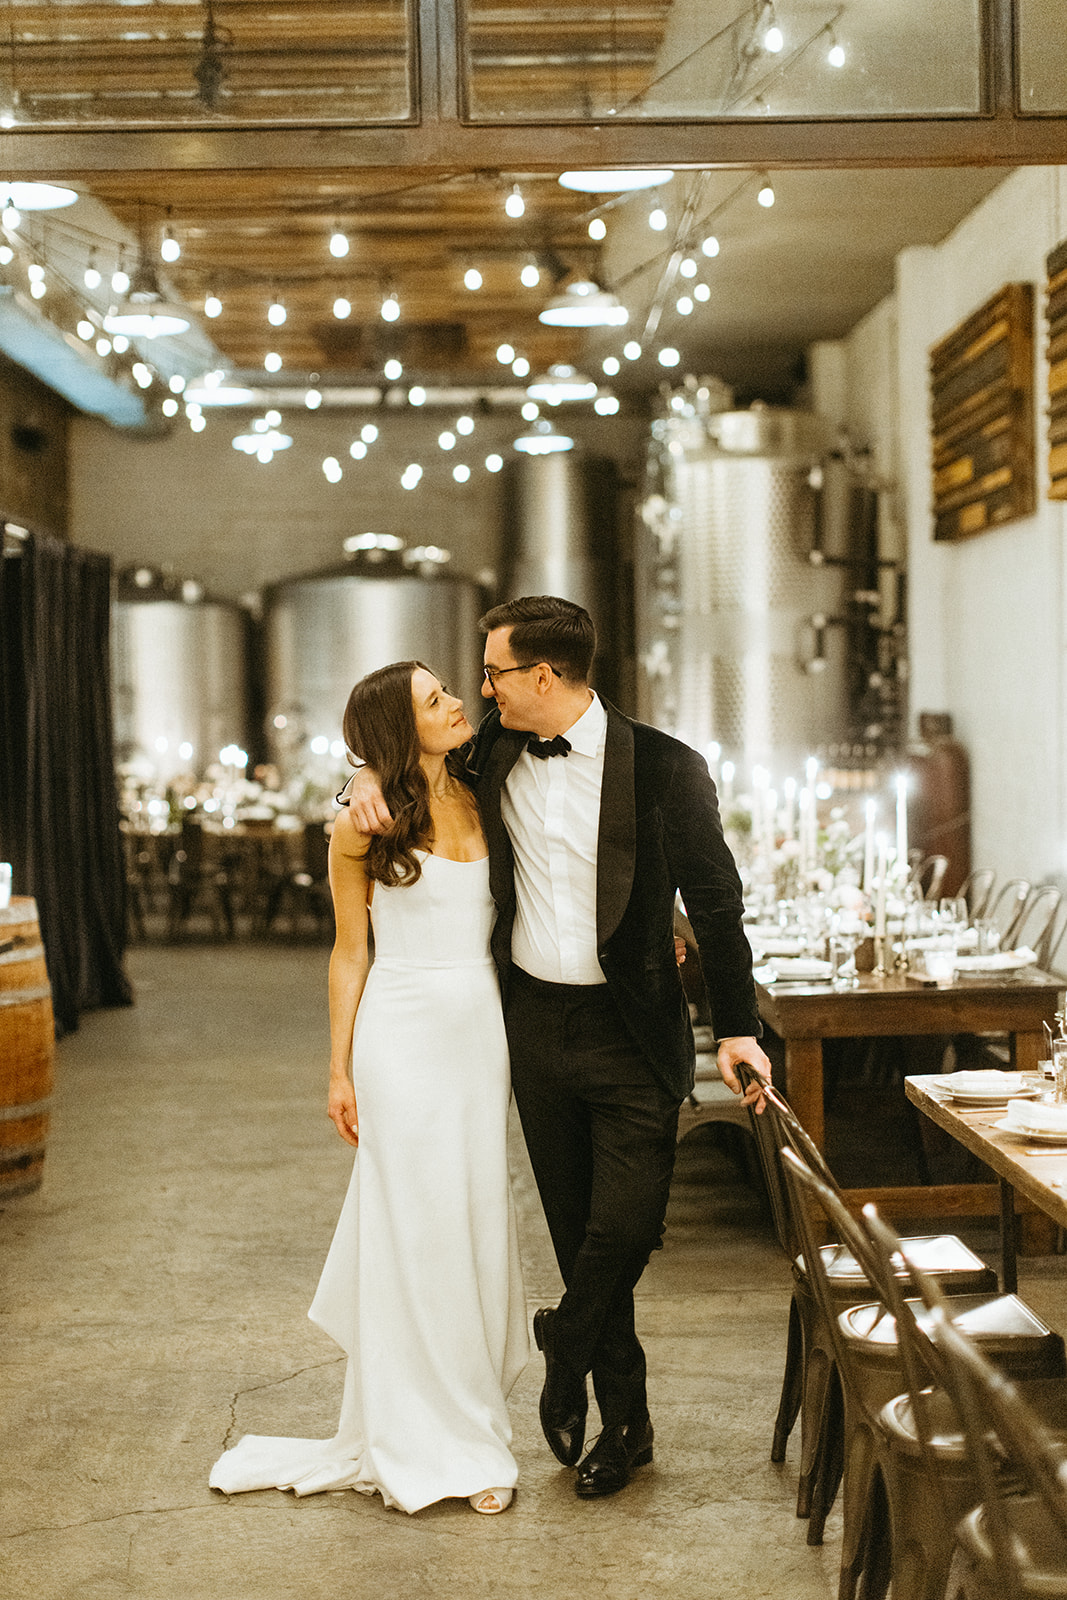 A modern and romantic candle-lit wedding with rustic-chic touches at Brooklyn Winery. Shot by Weddings by Nato